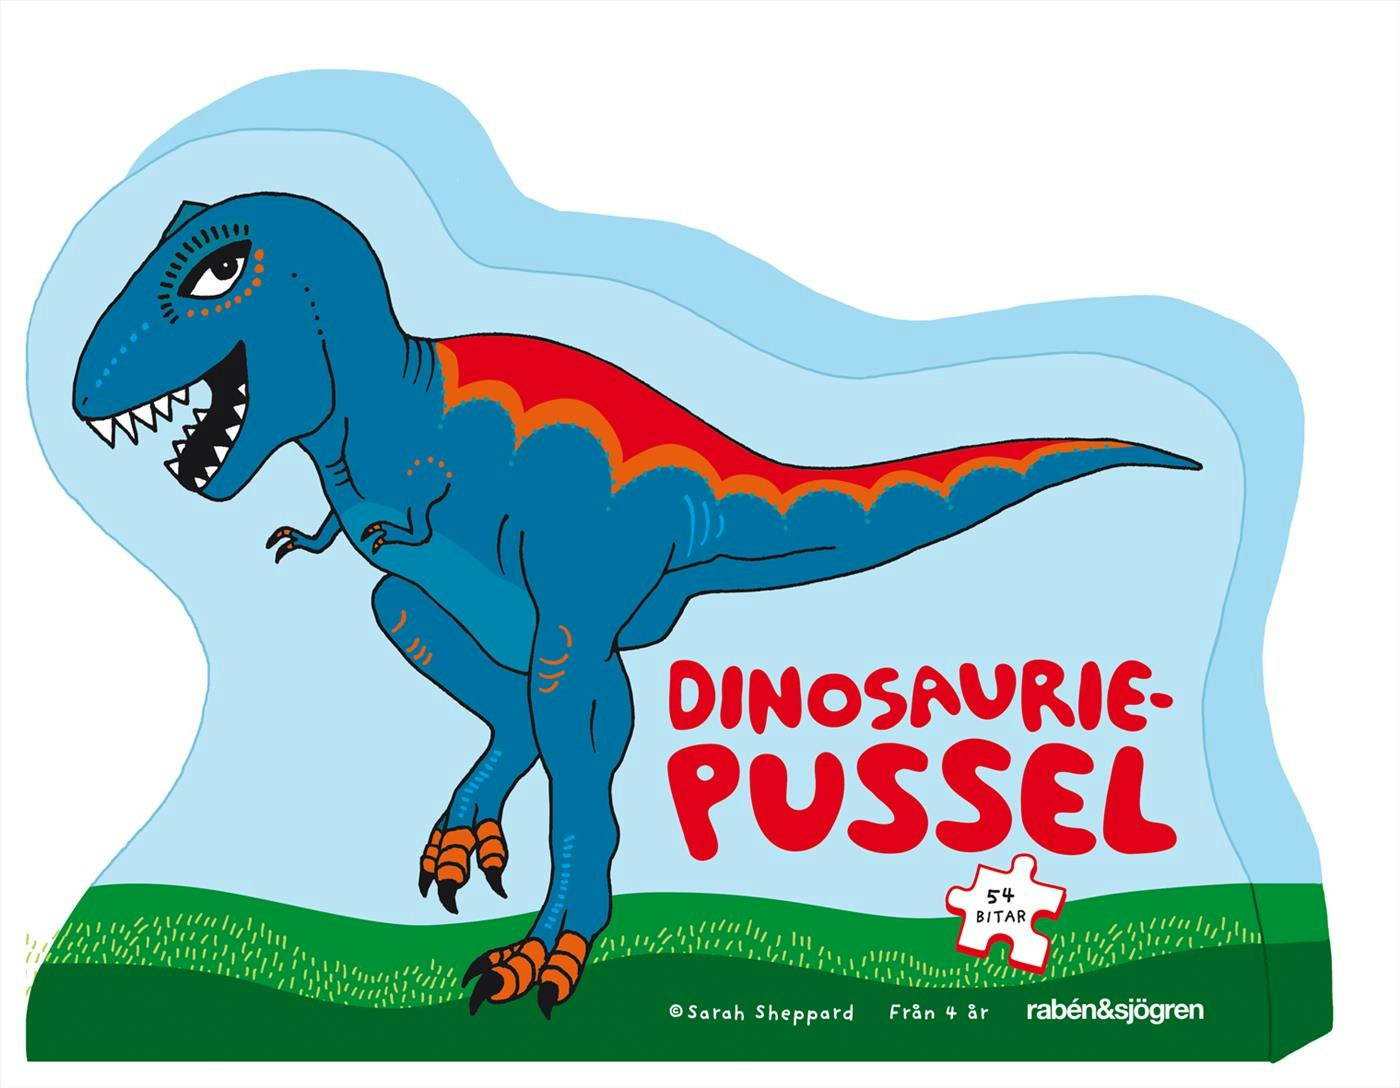 Dinosaurie-pussel